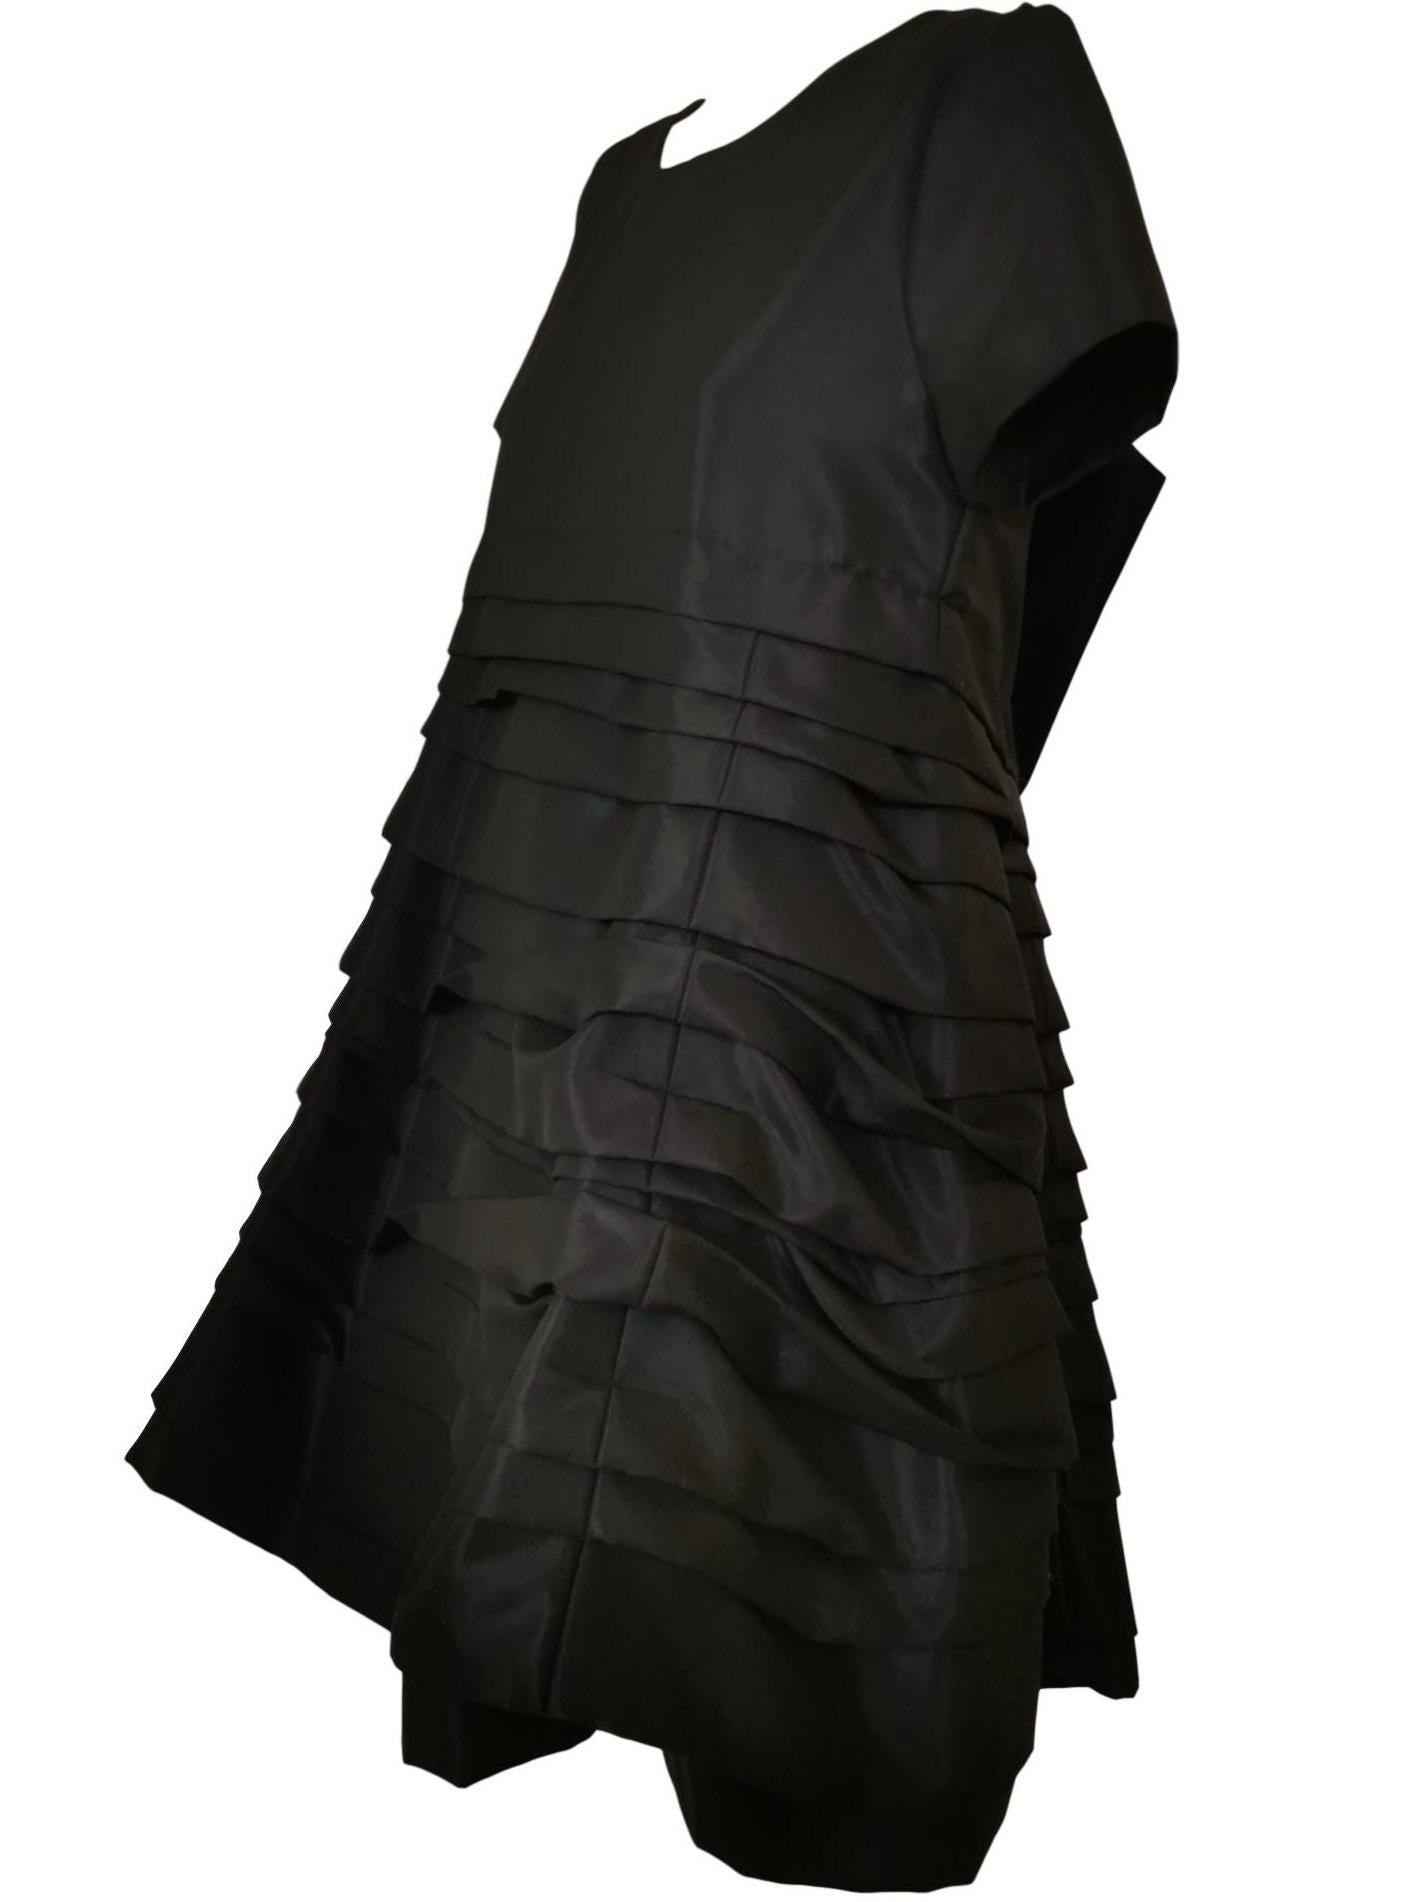 Comme des Garcons Horizontal Pleated Dress with Back Flap 1994 For Sale 1